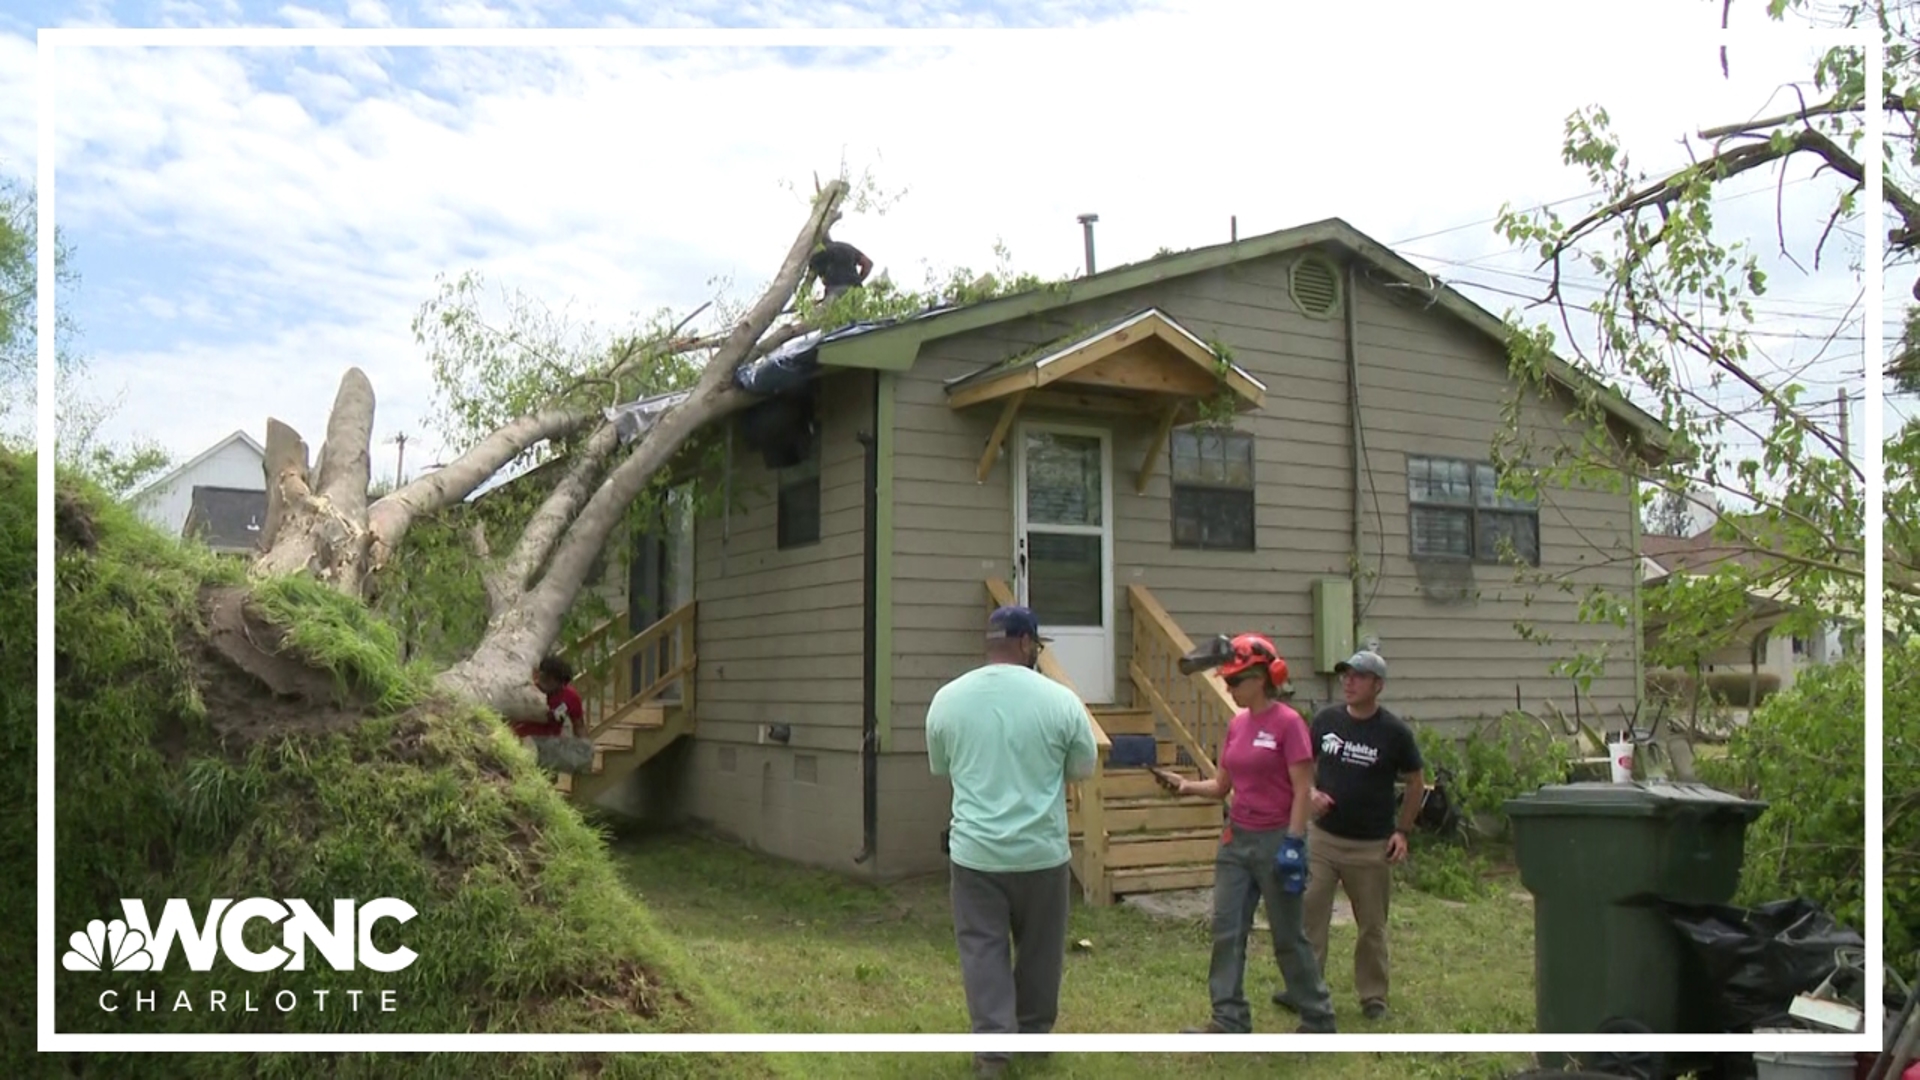 Volunteers with York Habitat for Humanity spent Wednesday working to help families recover after Saturday's storms left some roads impassable and homes destroyed.